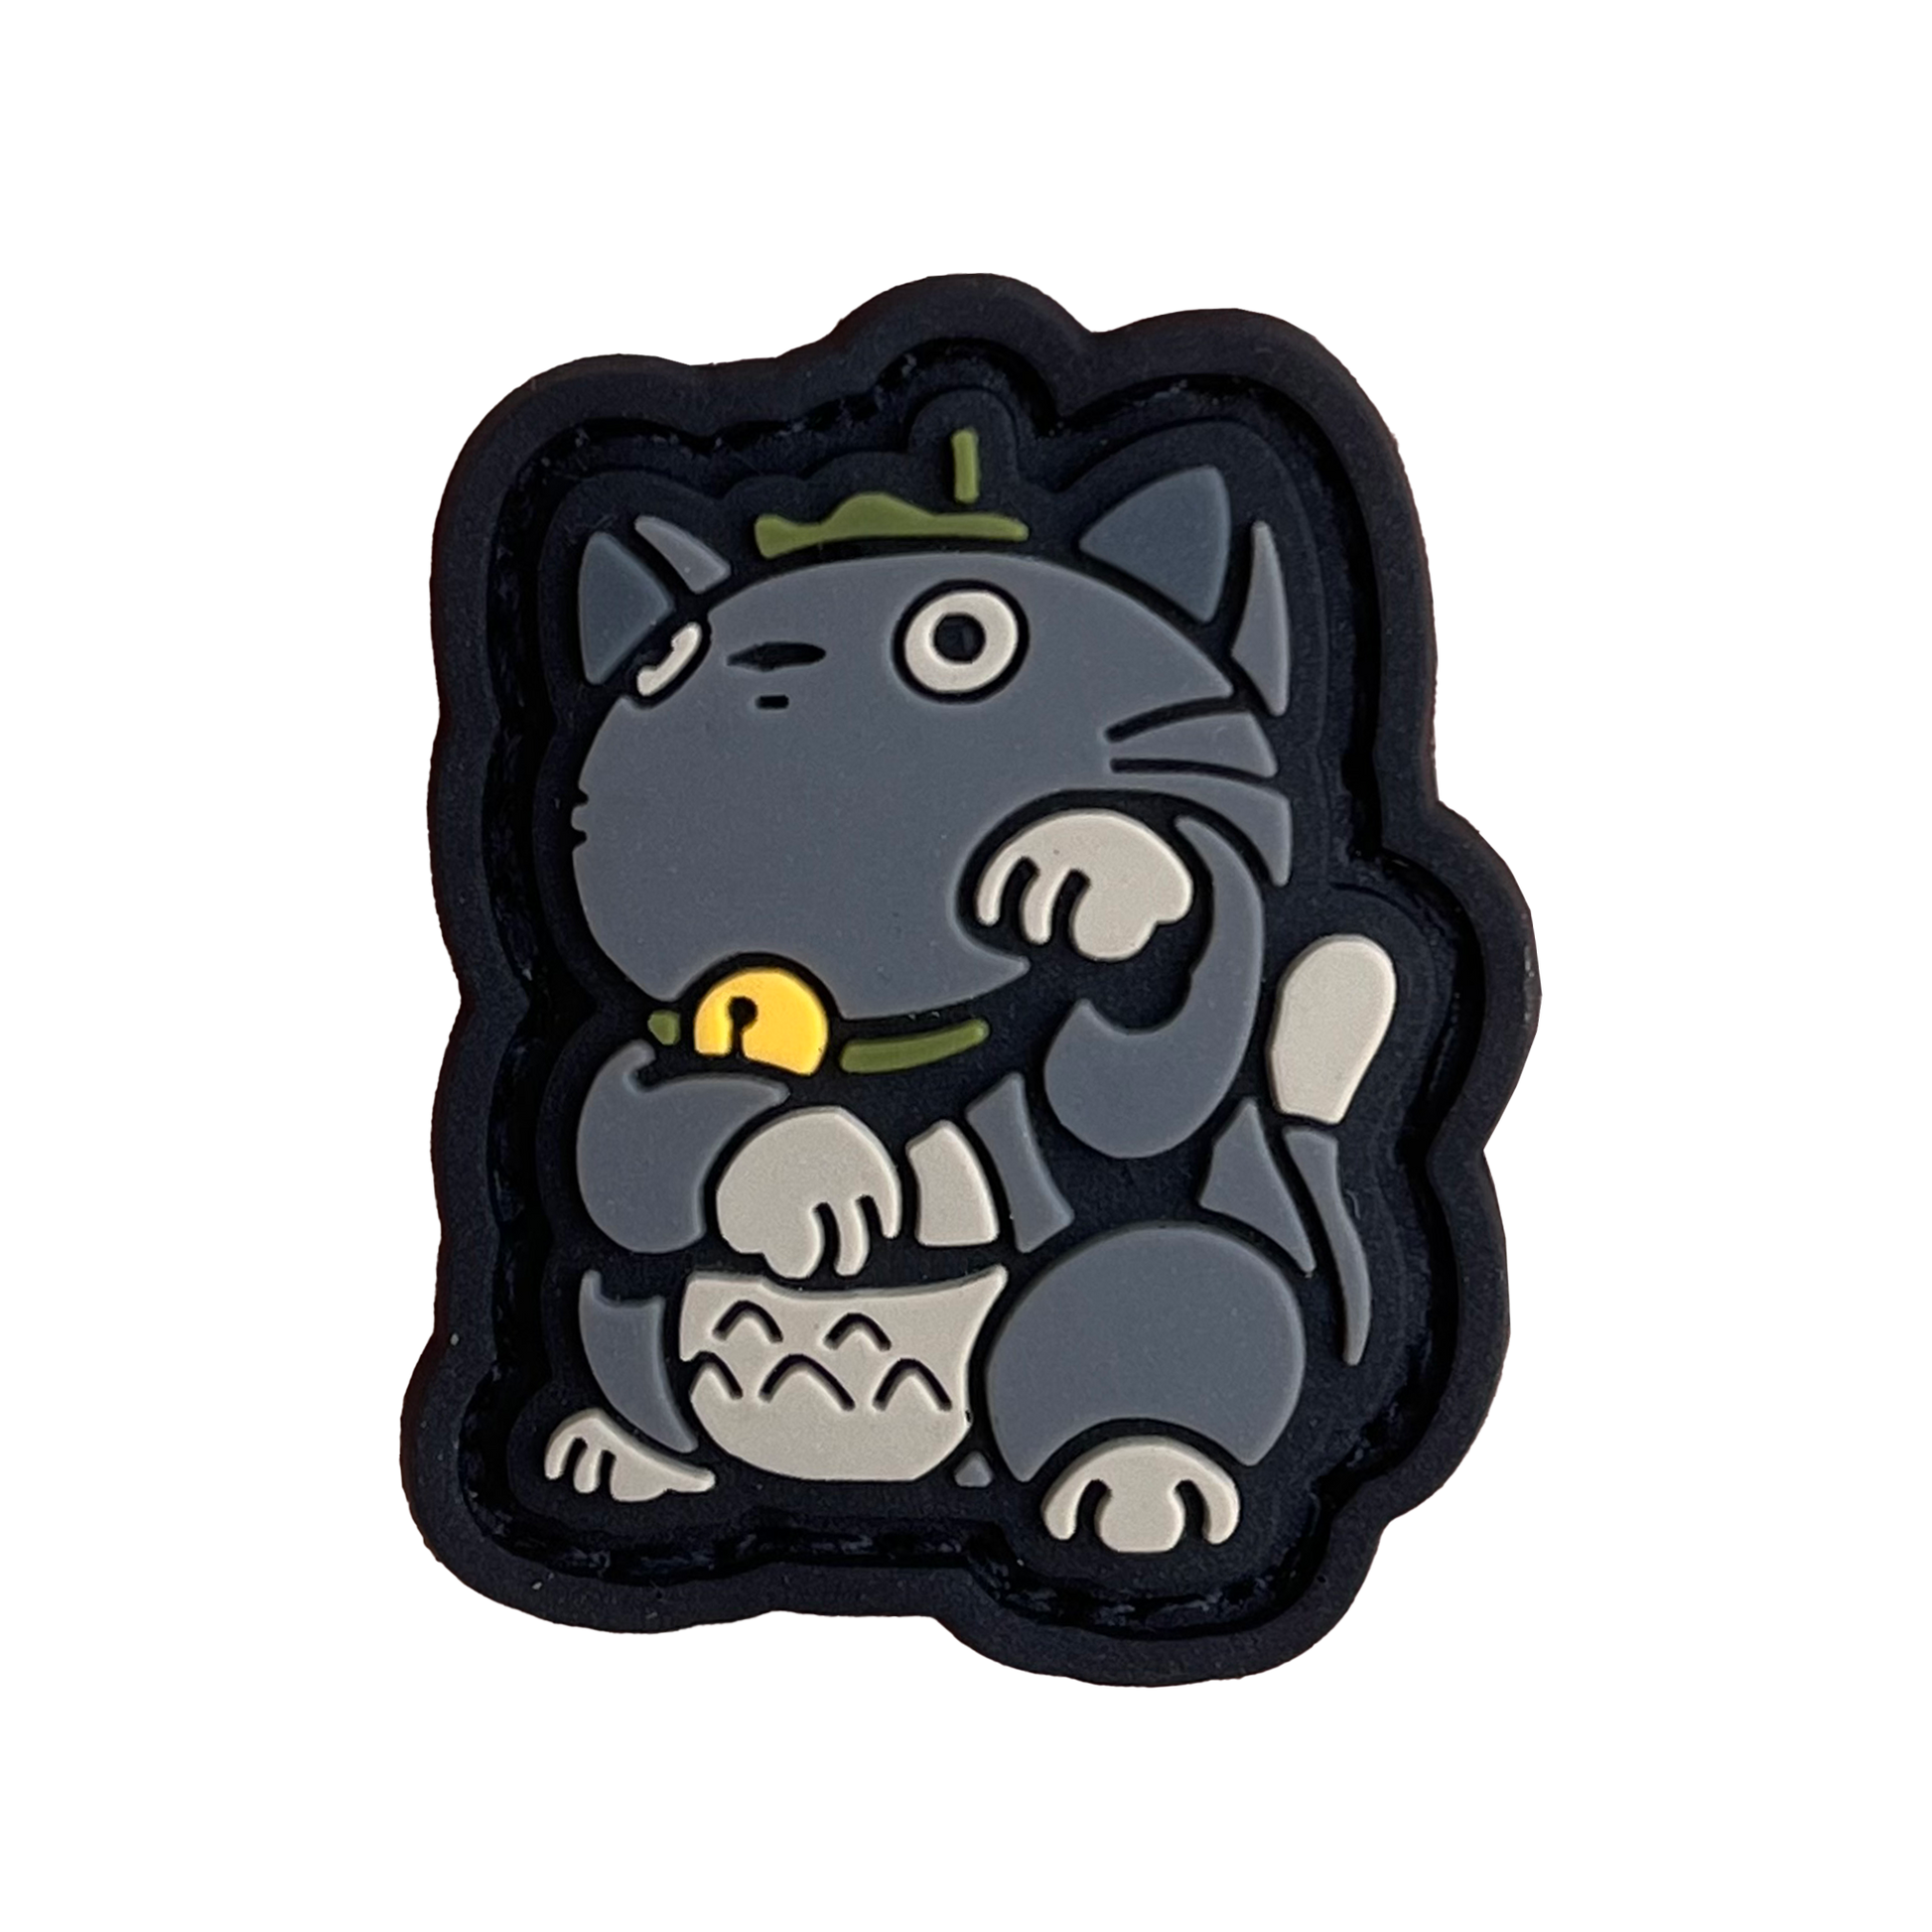 A gray cat in the neko (lucky cat) pose resembling Totoro from Studio Ghibli.